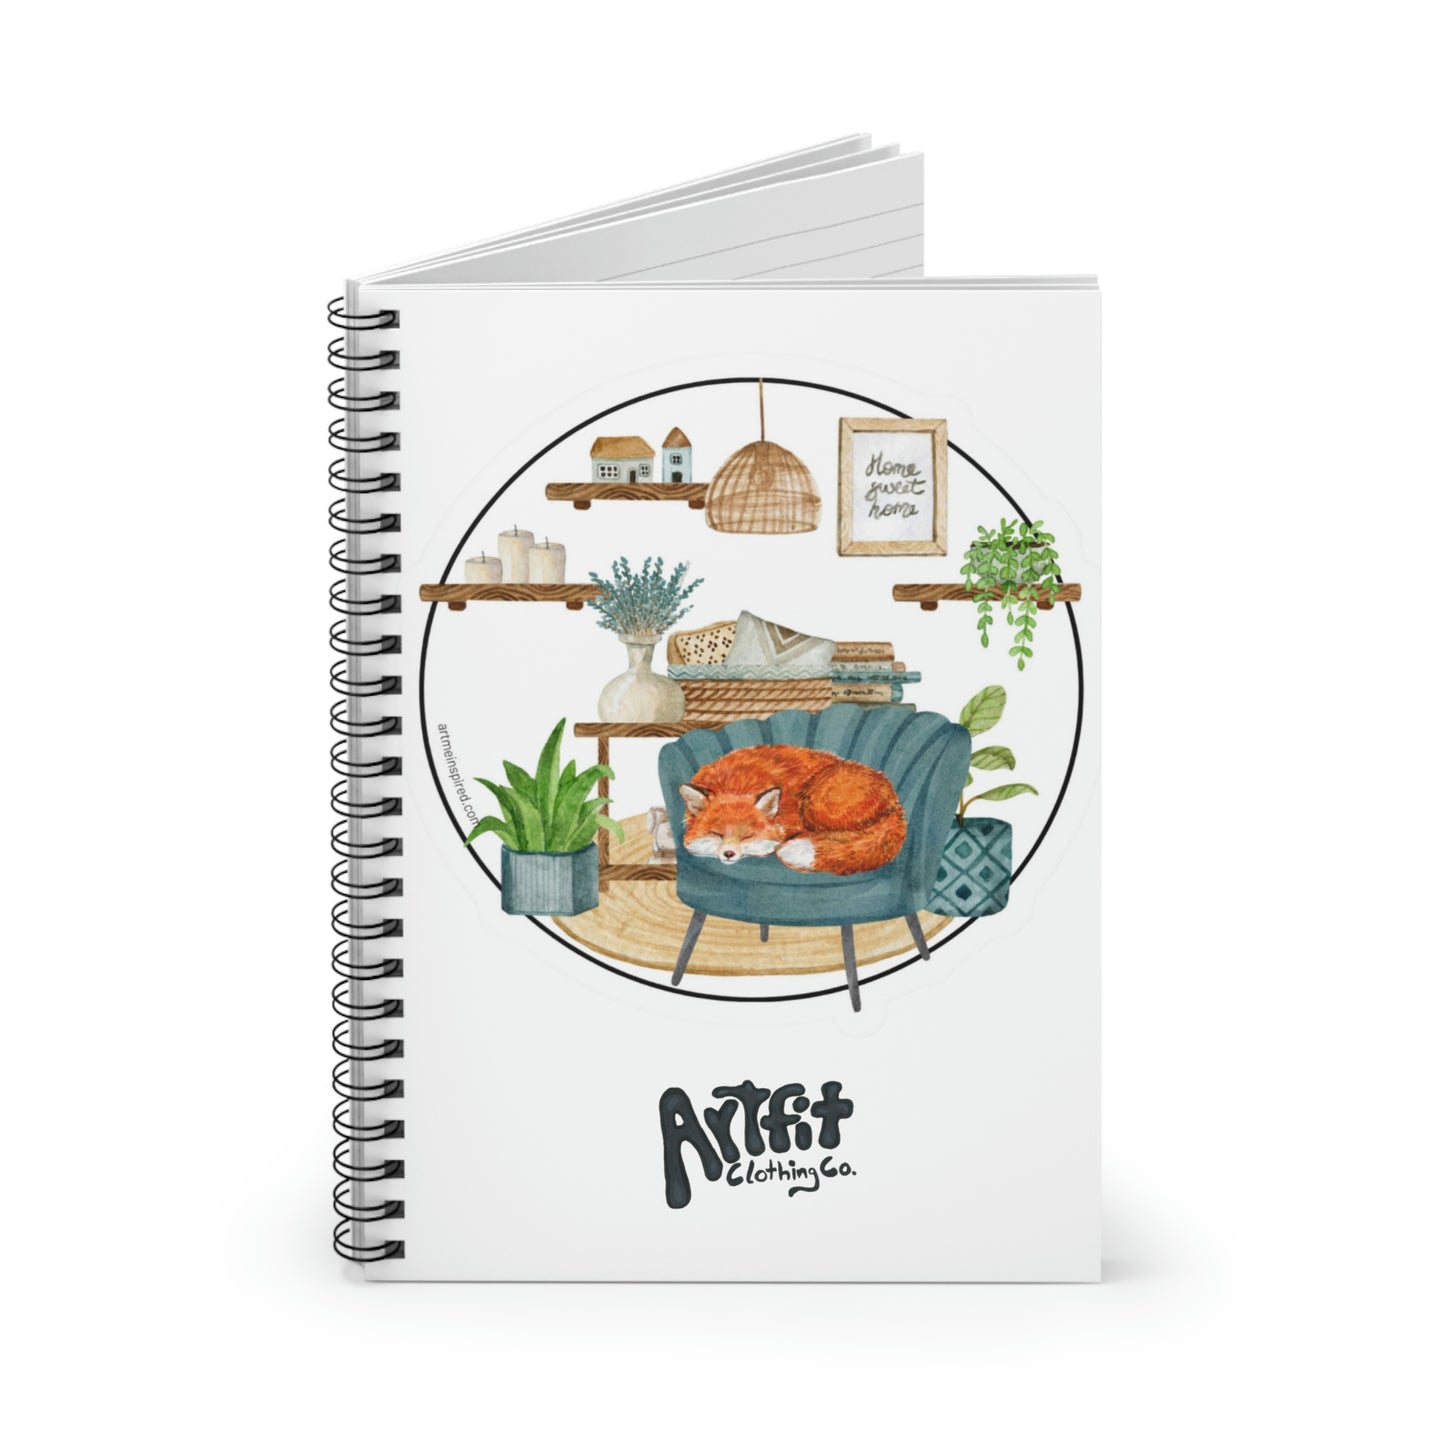 Catherine Hayford, Nap Time Spiral Notebook - Ruled Line